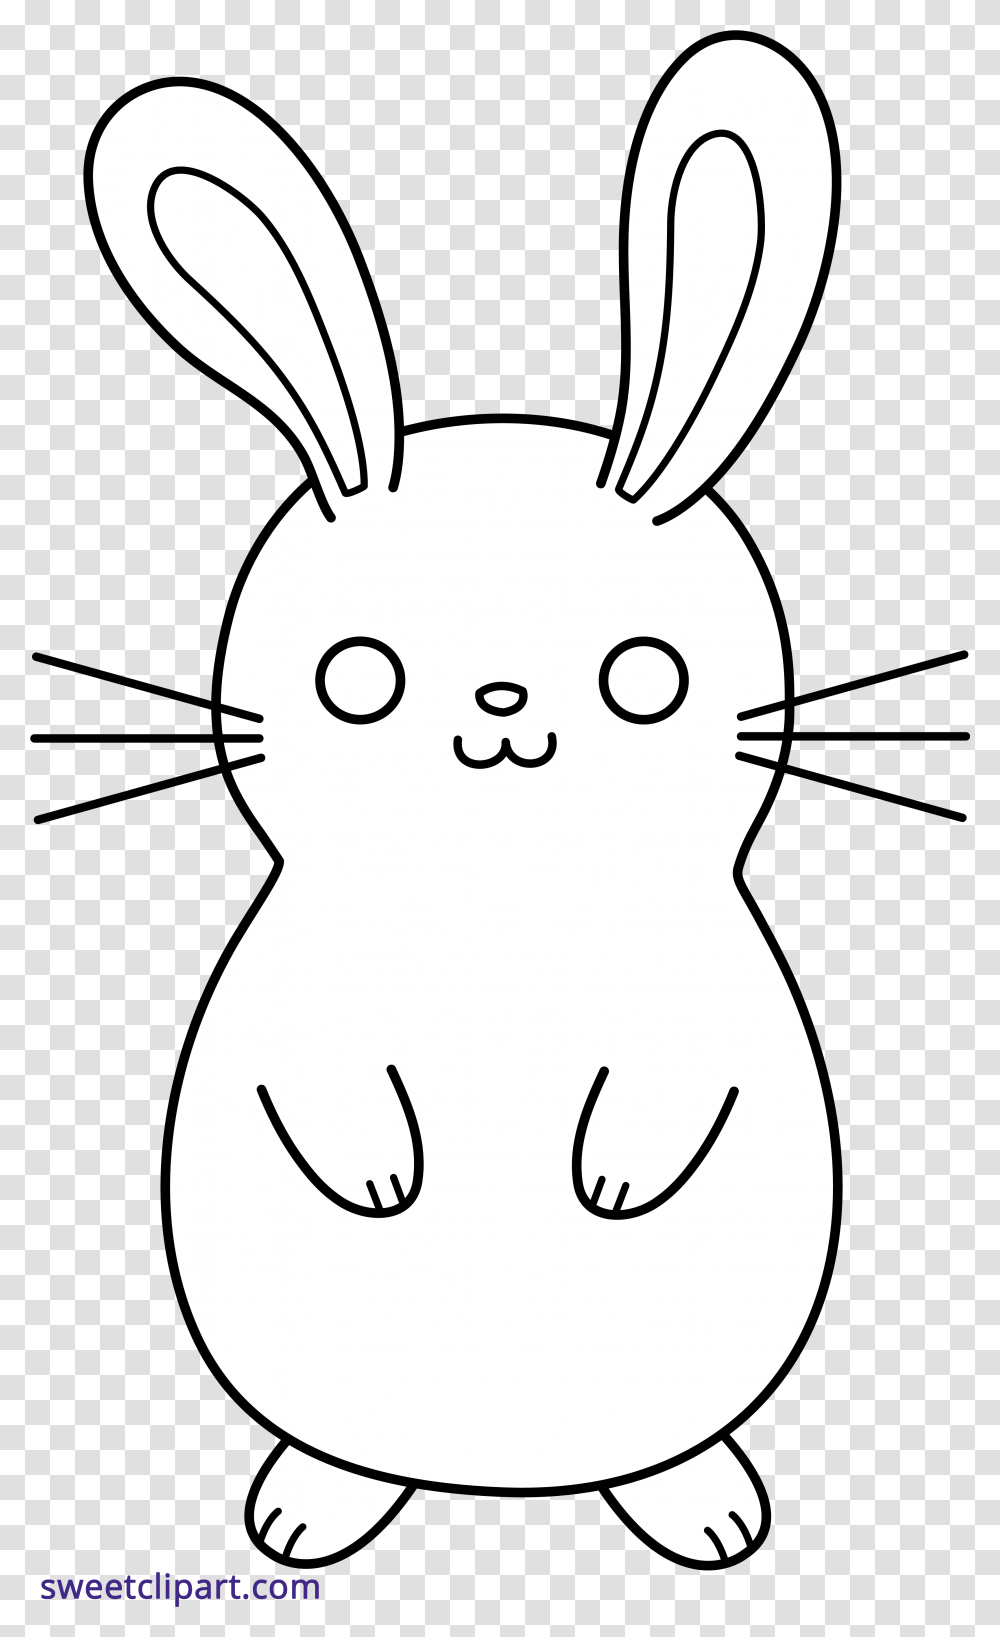 Bunny Rabbit Cute Lineart Black White Cute Rabbit Clipart Black And White, Mammal, Animal, Rodent, Snowman Transparent Png